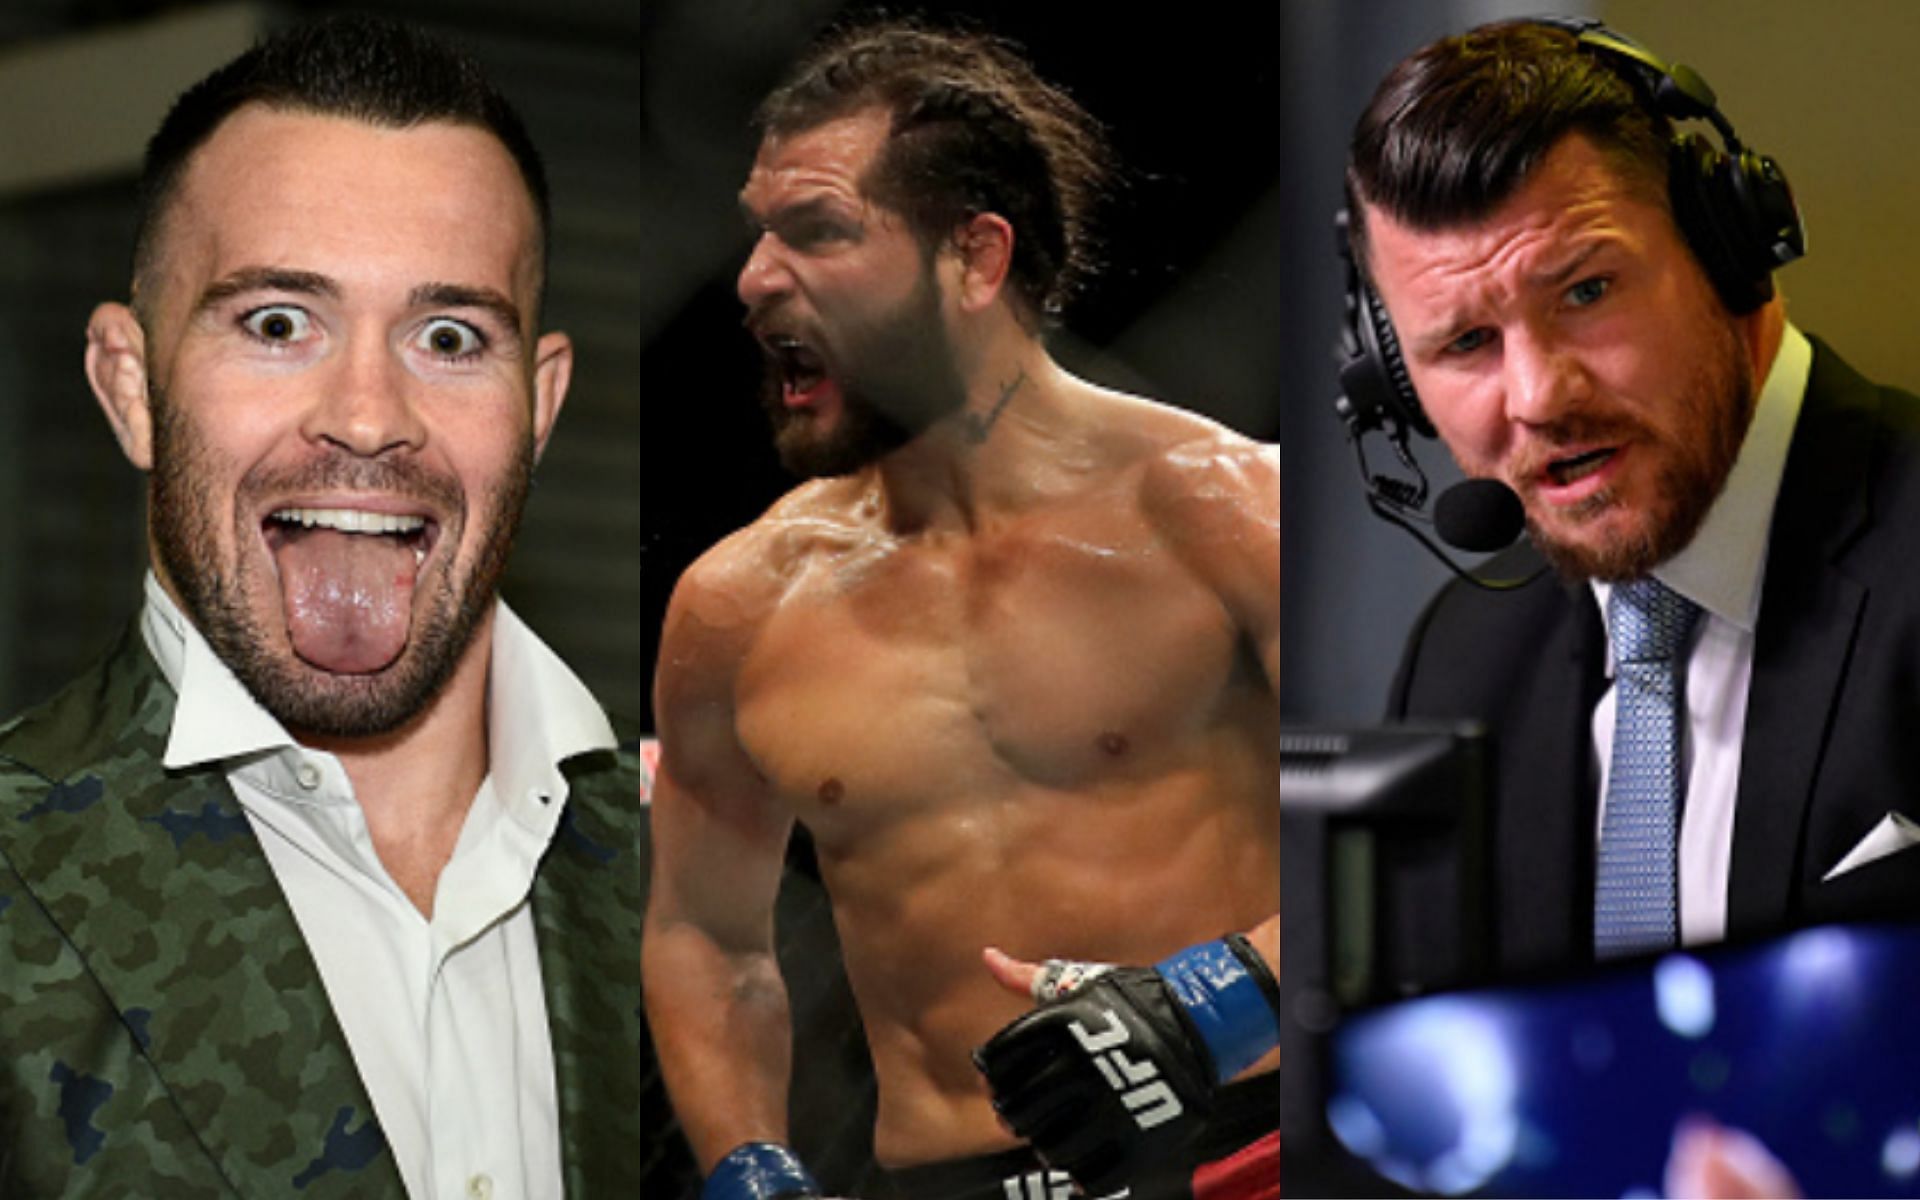 Colby Covington (left); Jorge Masvidal (center); Michael Bisping (right)